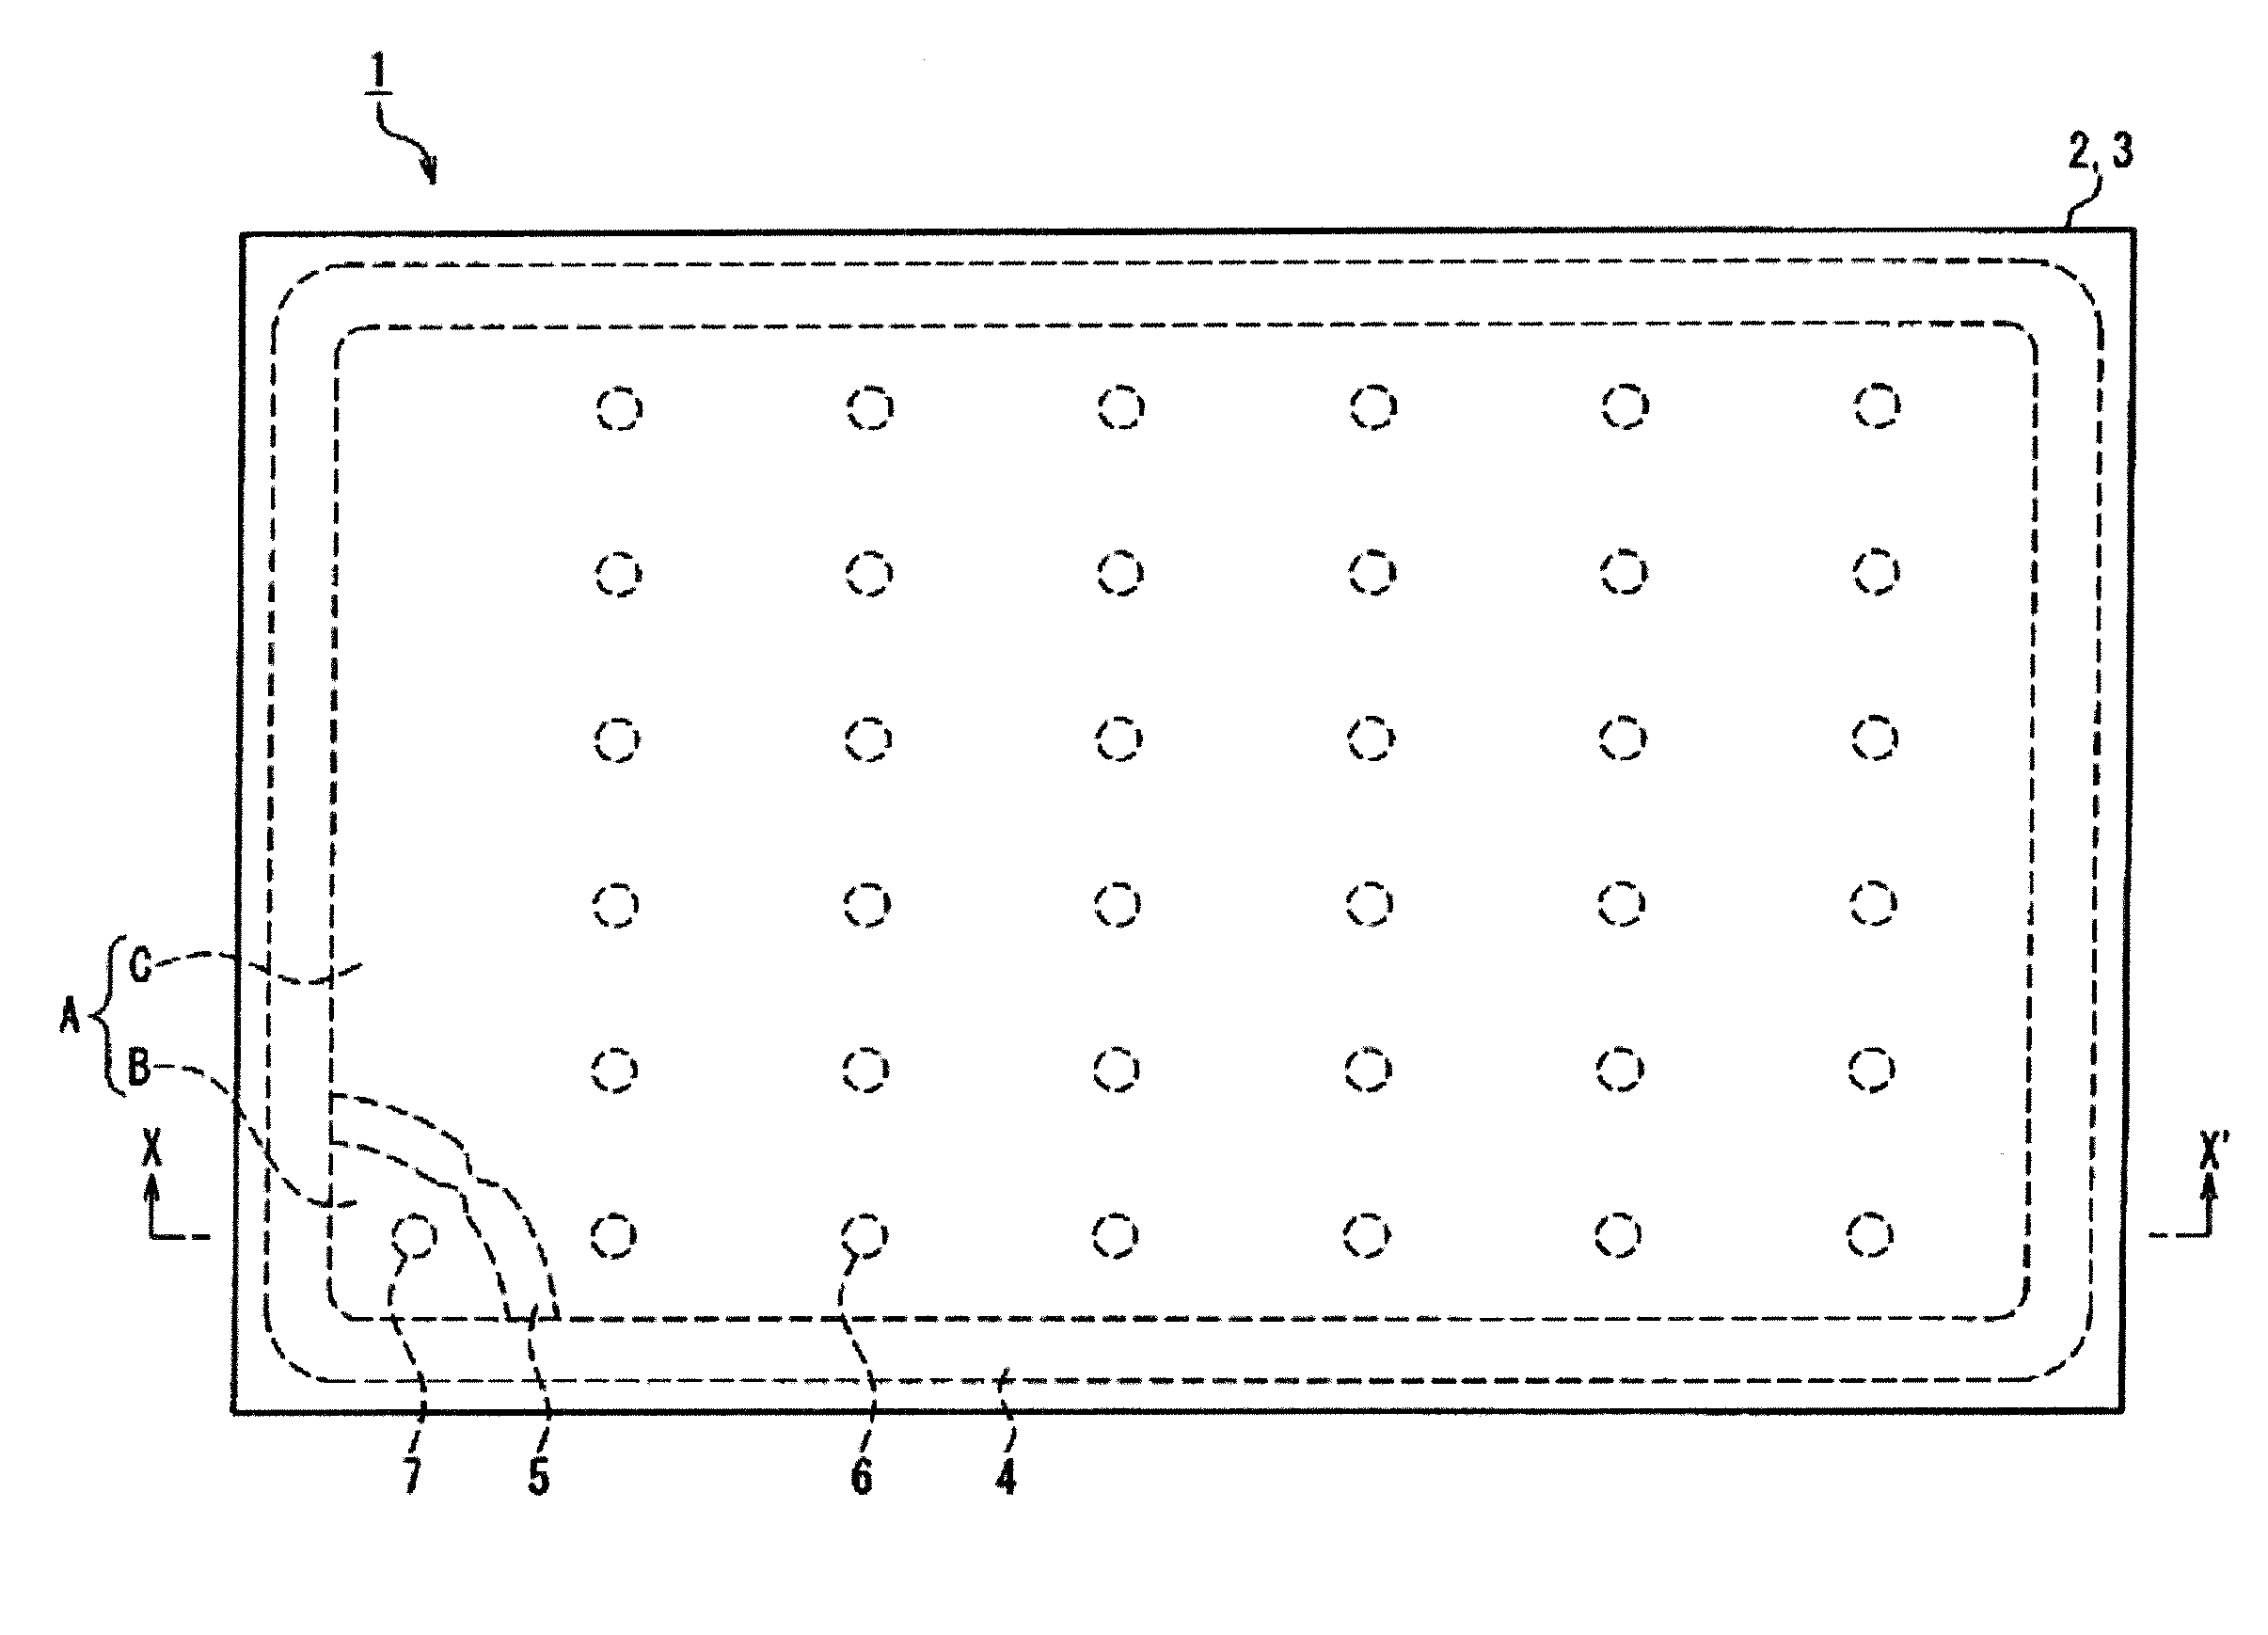 Production method of multiple panes